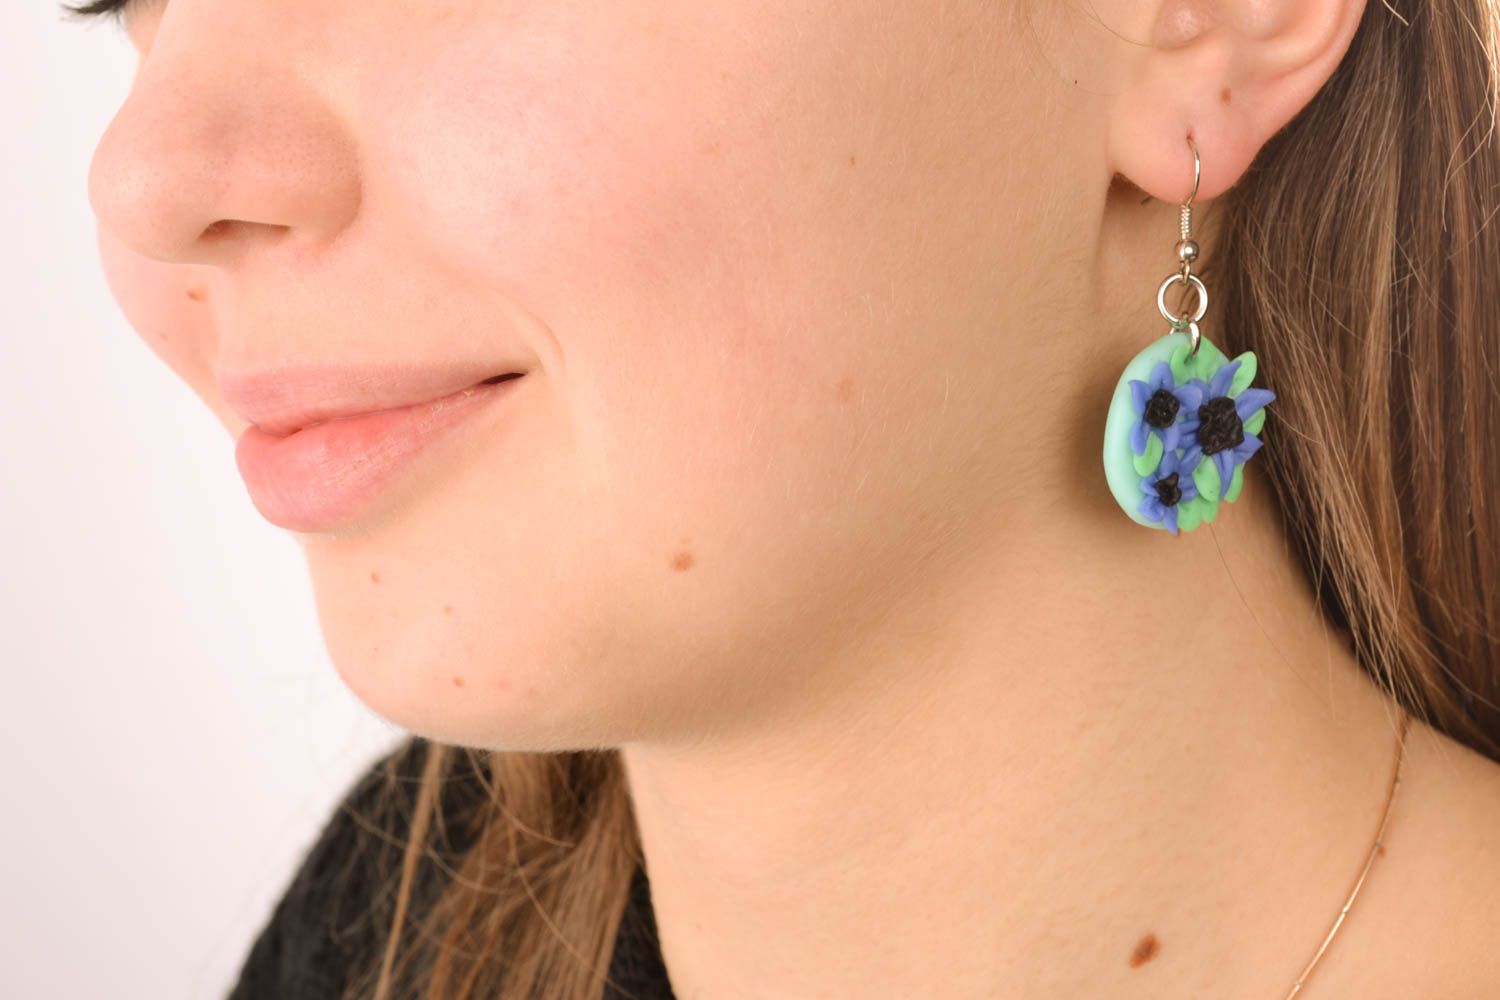 Plastic earrings with charms photo 5